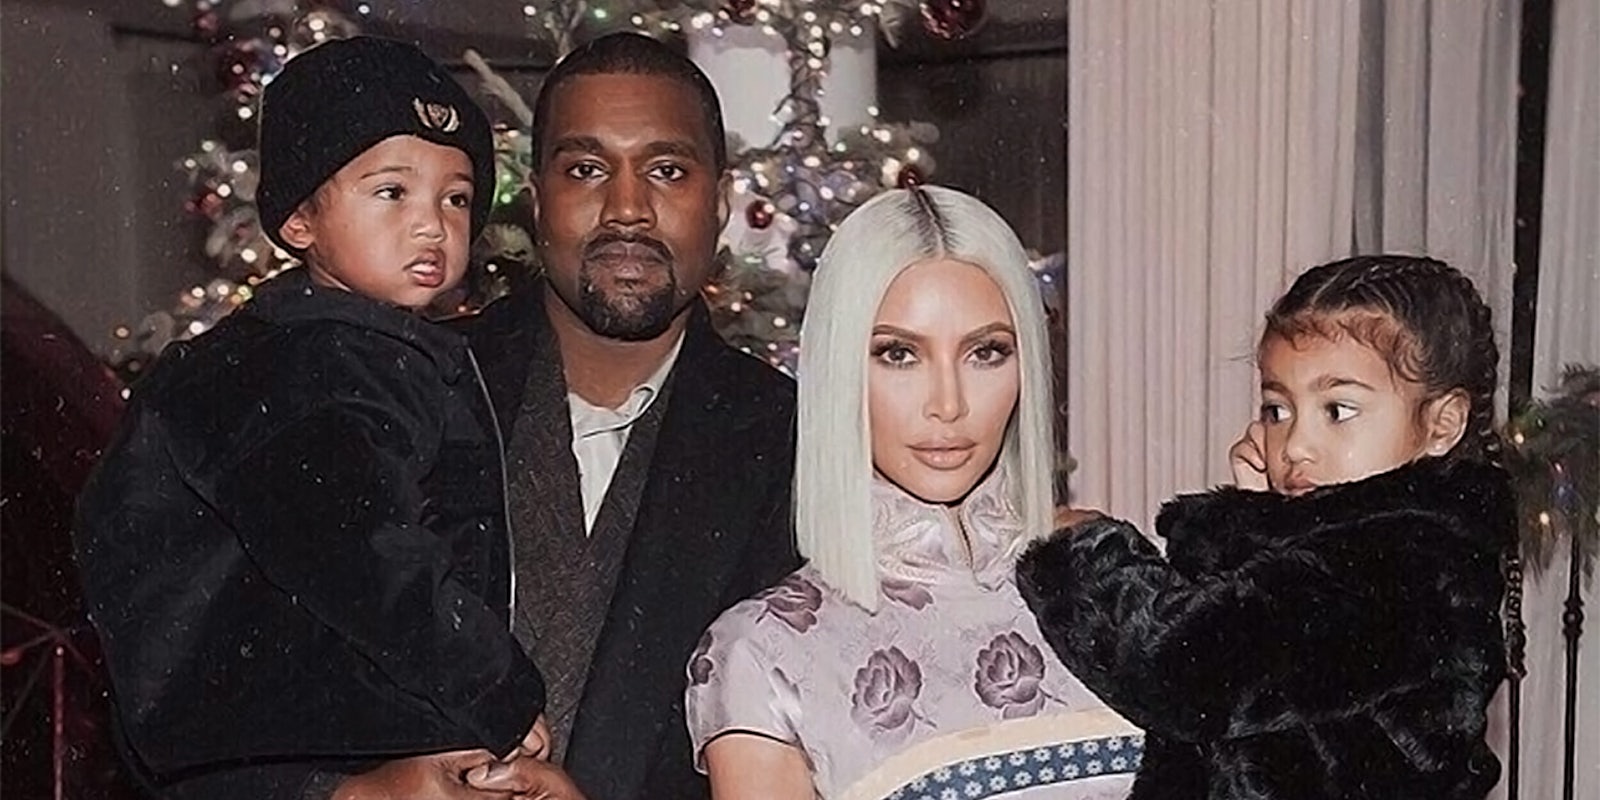 Kanye West, Kim Kardashian and family welcome their new baby girl